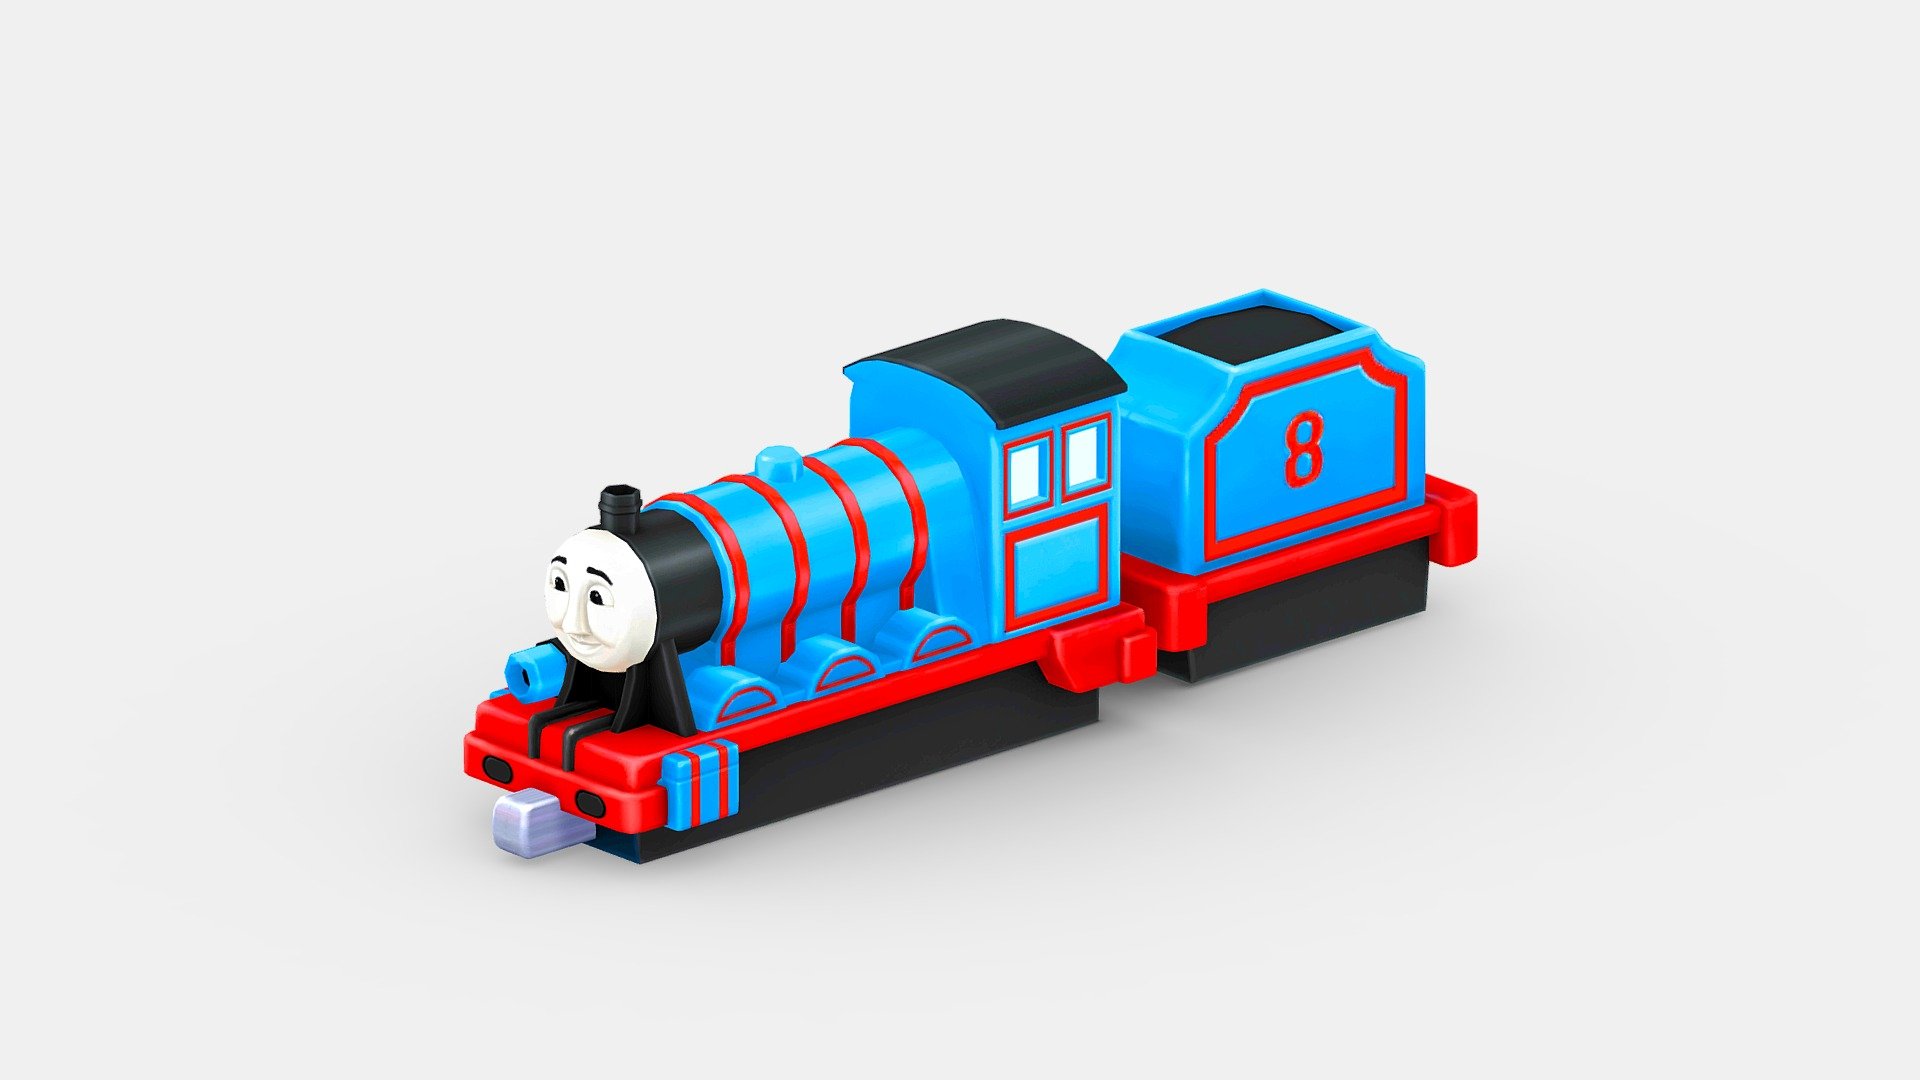 File contains : 3 Texture + 1 Model

Texture1= blue

Texture2= red 

Texture3= yellow - Cartoon train toy Thomas the Tank Engine - Buy Royalty Free 3D model by ler_cartoon (@lerrrrr) 3d model